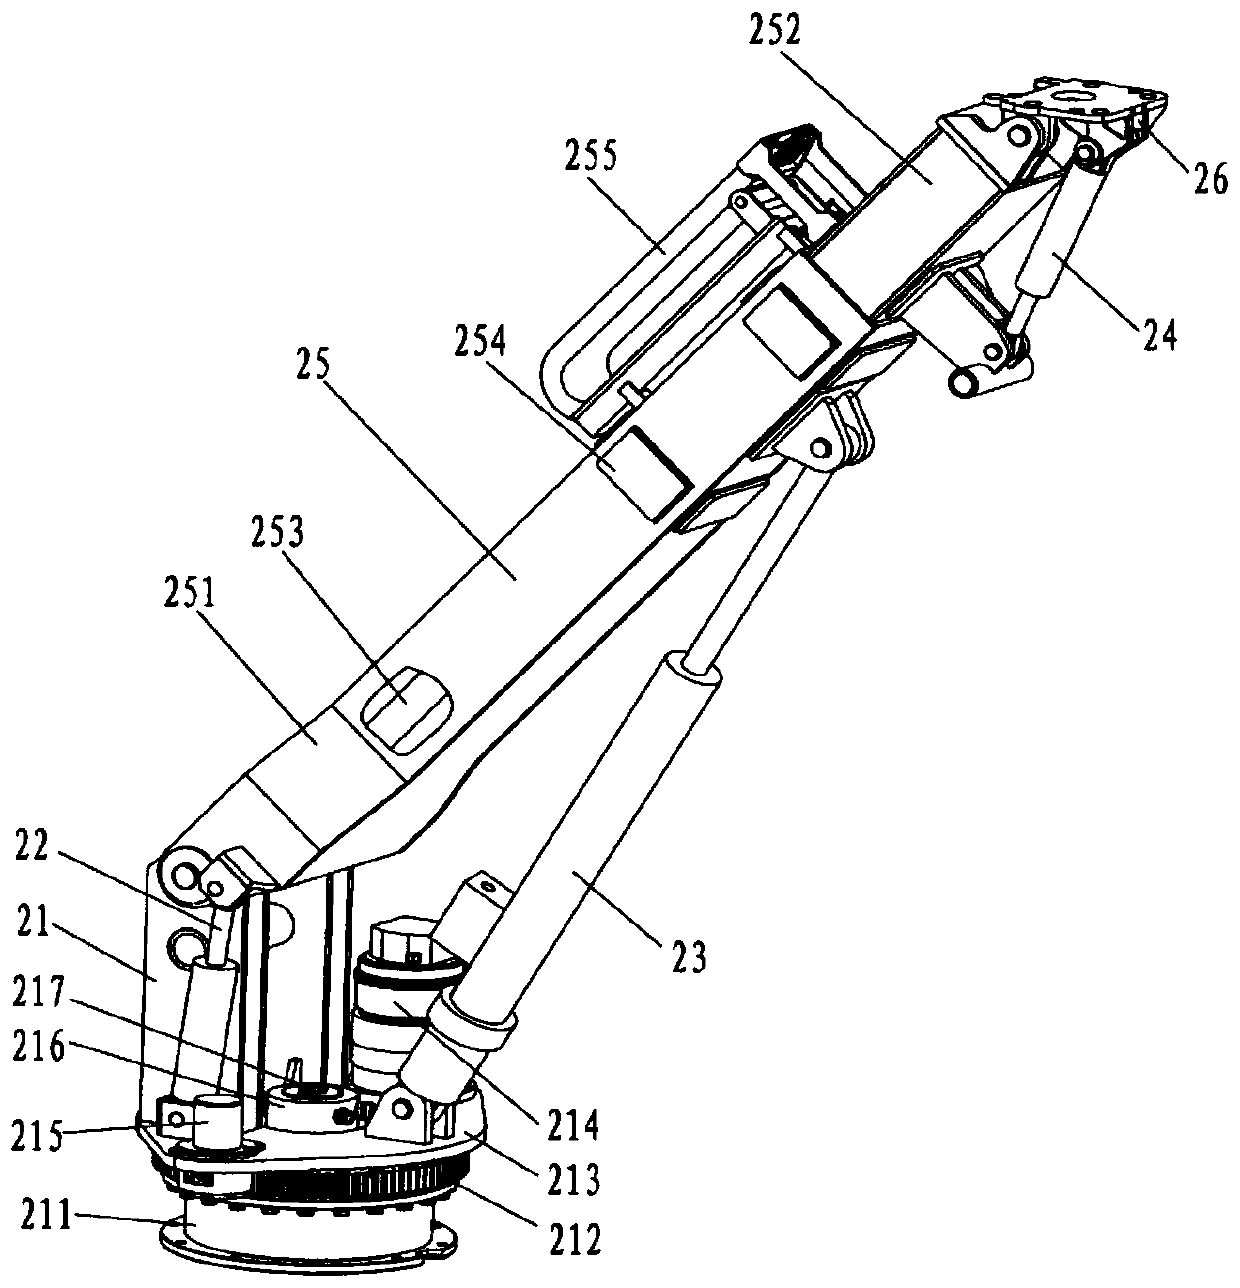 Drill stand face pipe column treatment device